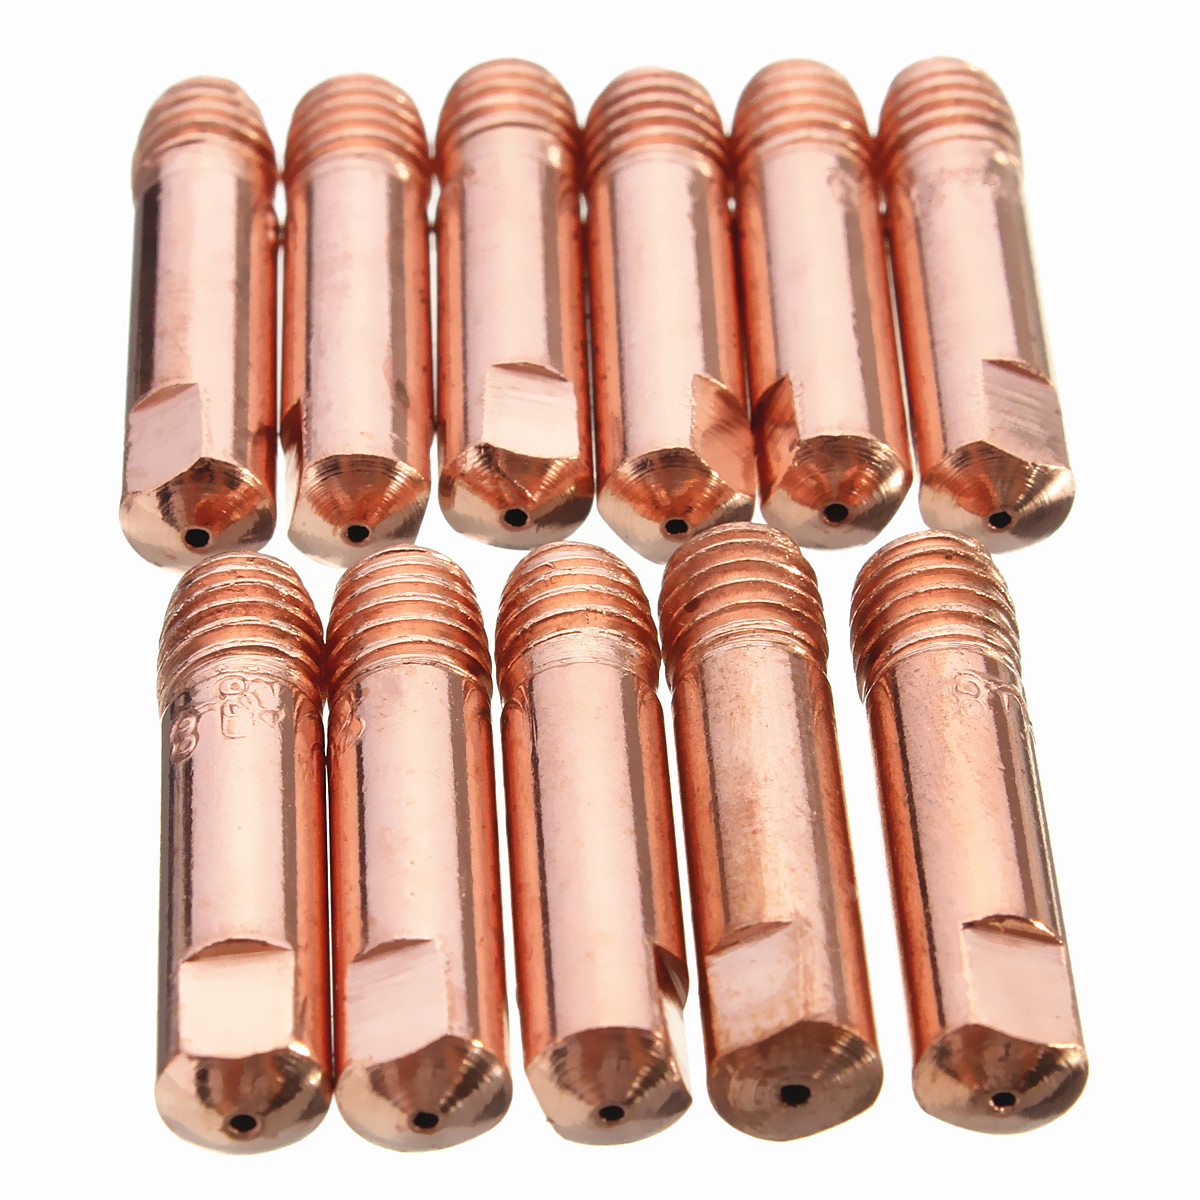 20* Thread M6 Contact Tips 0.9mm Gas Nozzle Copper For MB-15AK MIG Welding Torch